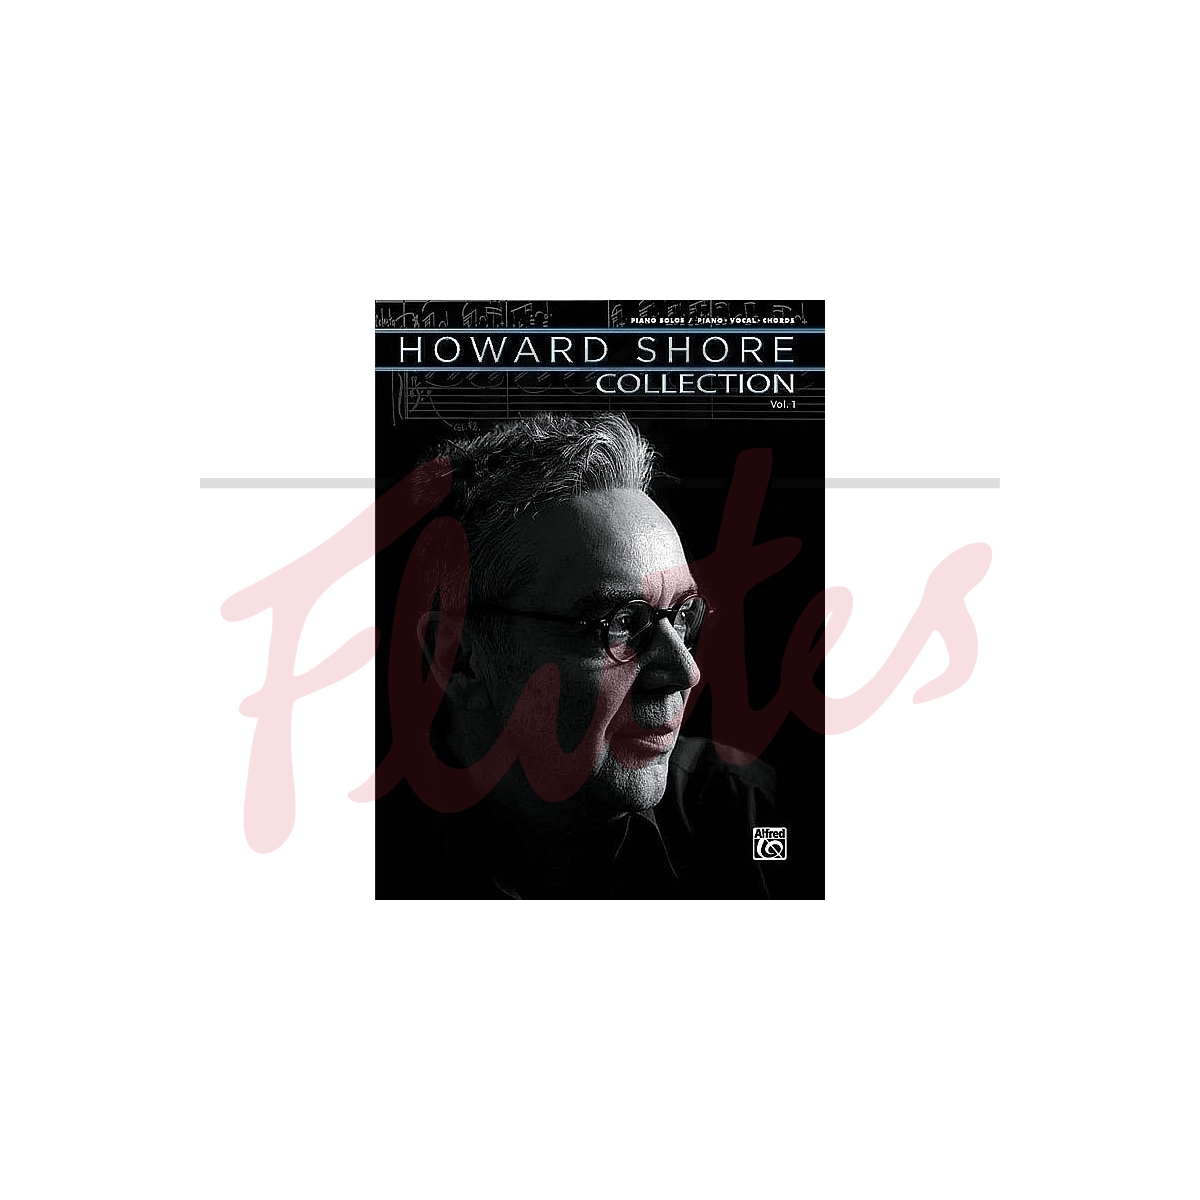 The Howard Shore Collection, Vol 1